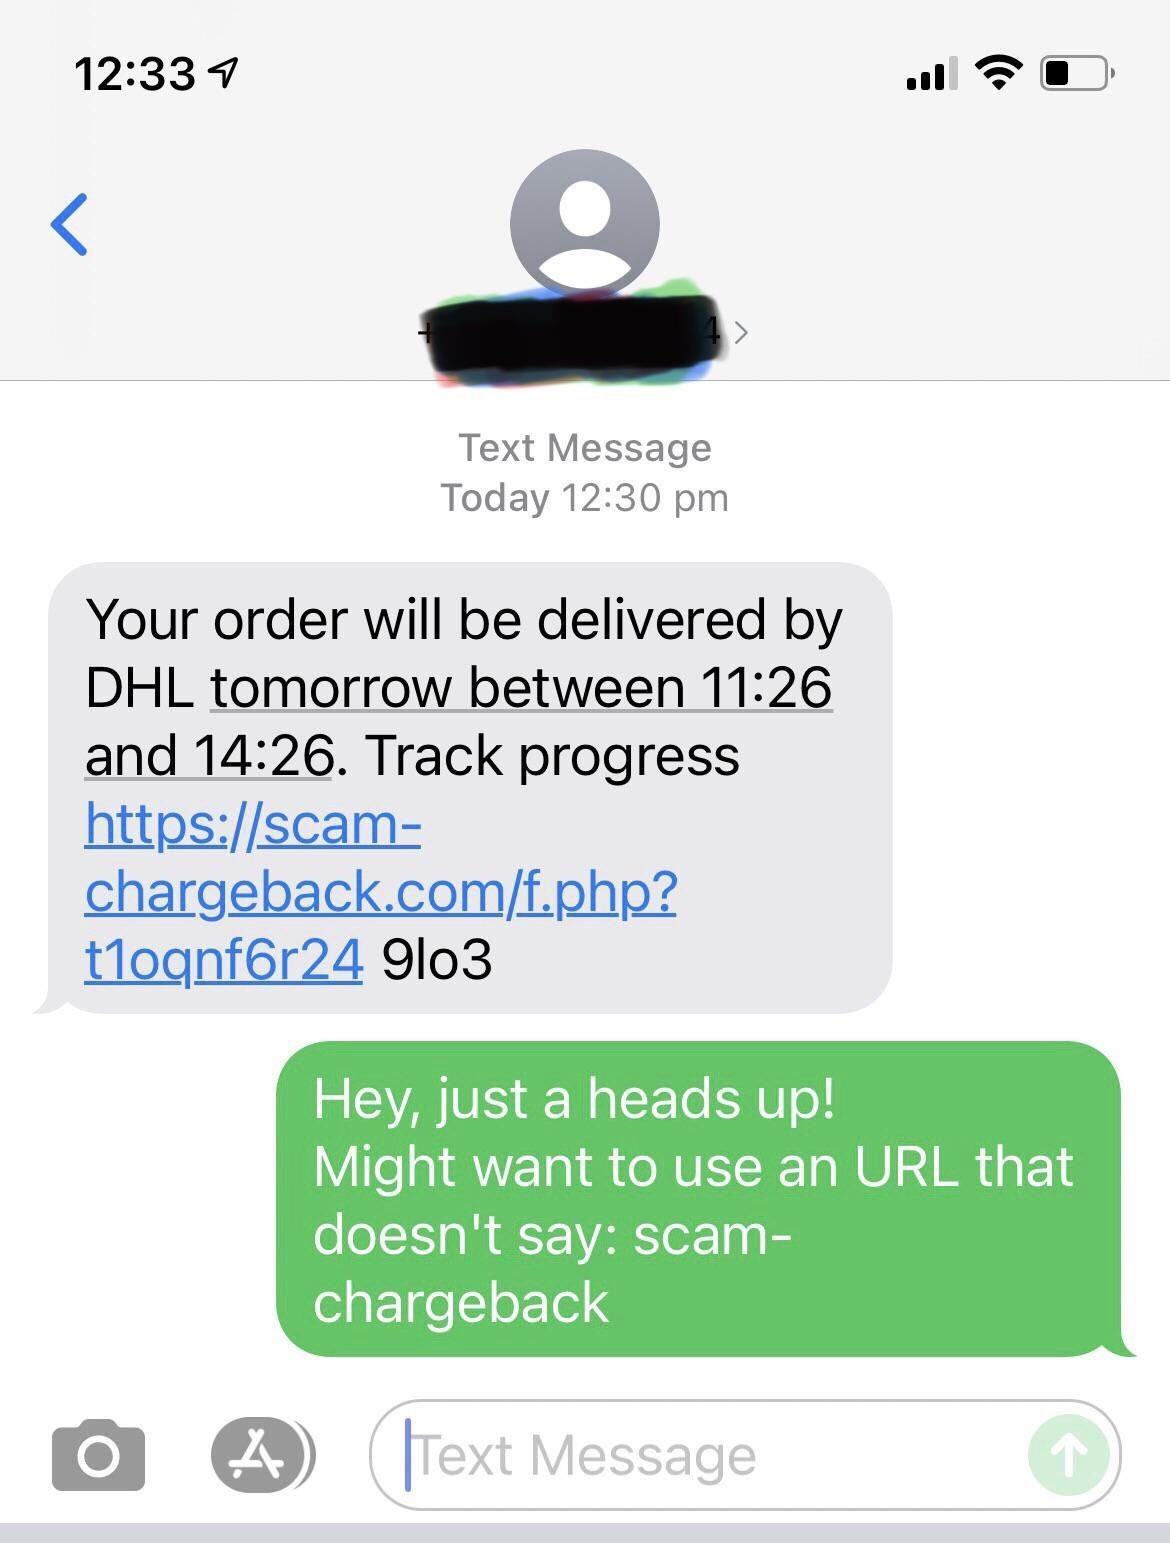 scammer sending their scam link that says its a scam in the url